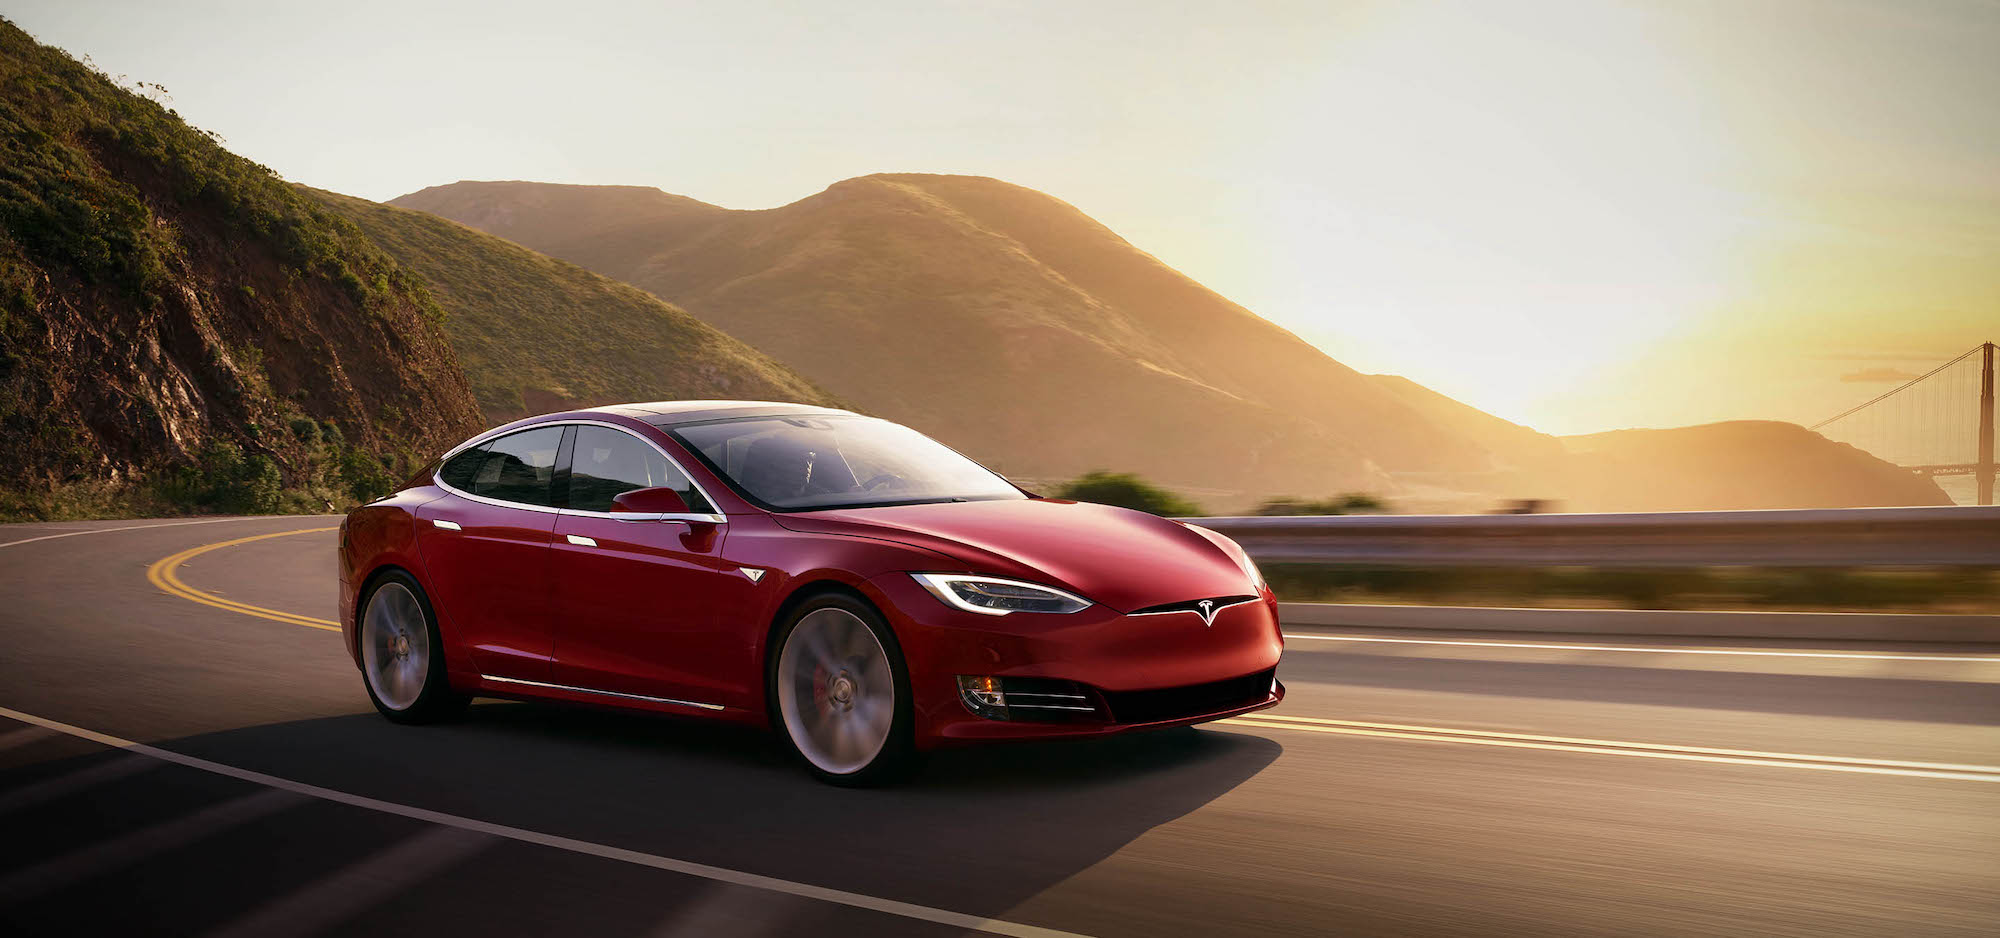 A red 2021 Tesla Model S travels on a two-lane highway in the mountains overlooking a body of water at sunset